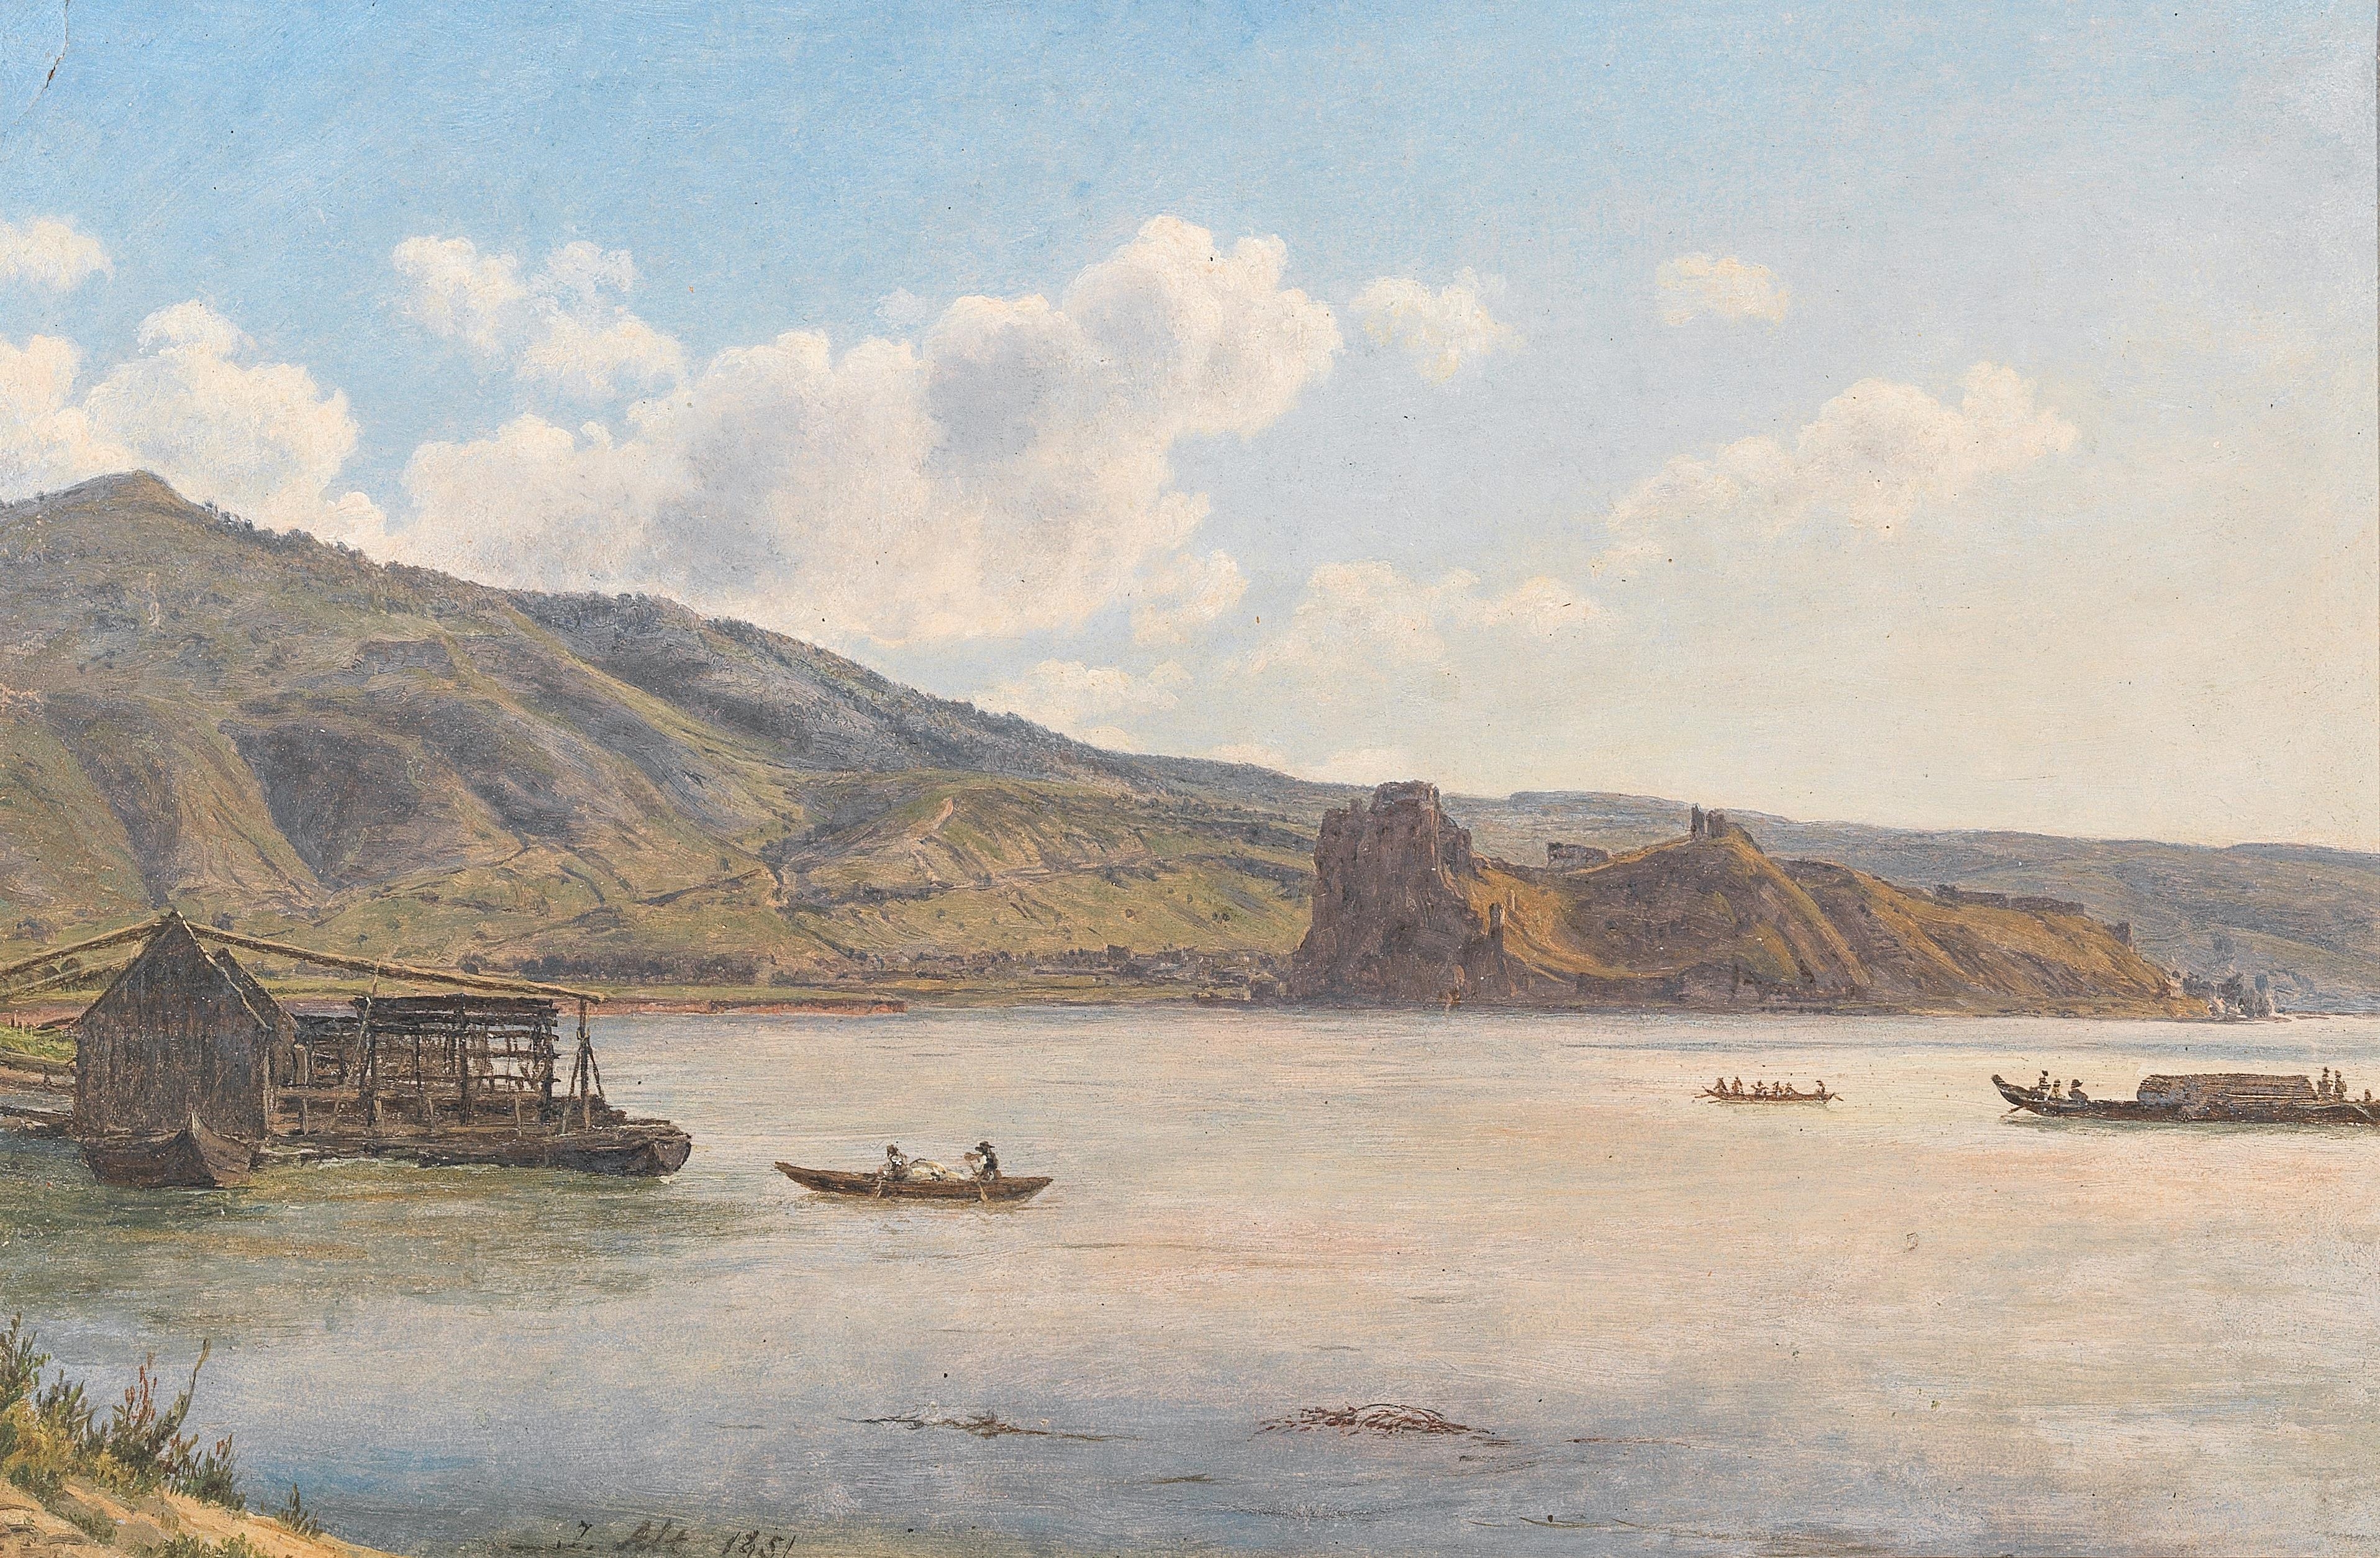 The ruins of Theben (Devin) near Bratislava, boats in the foreground by Jakob Alt, 1851